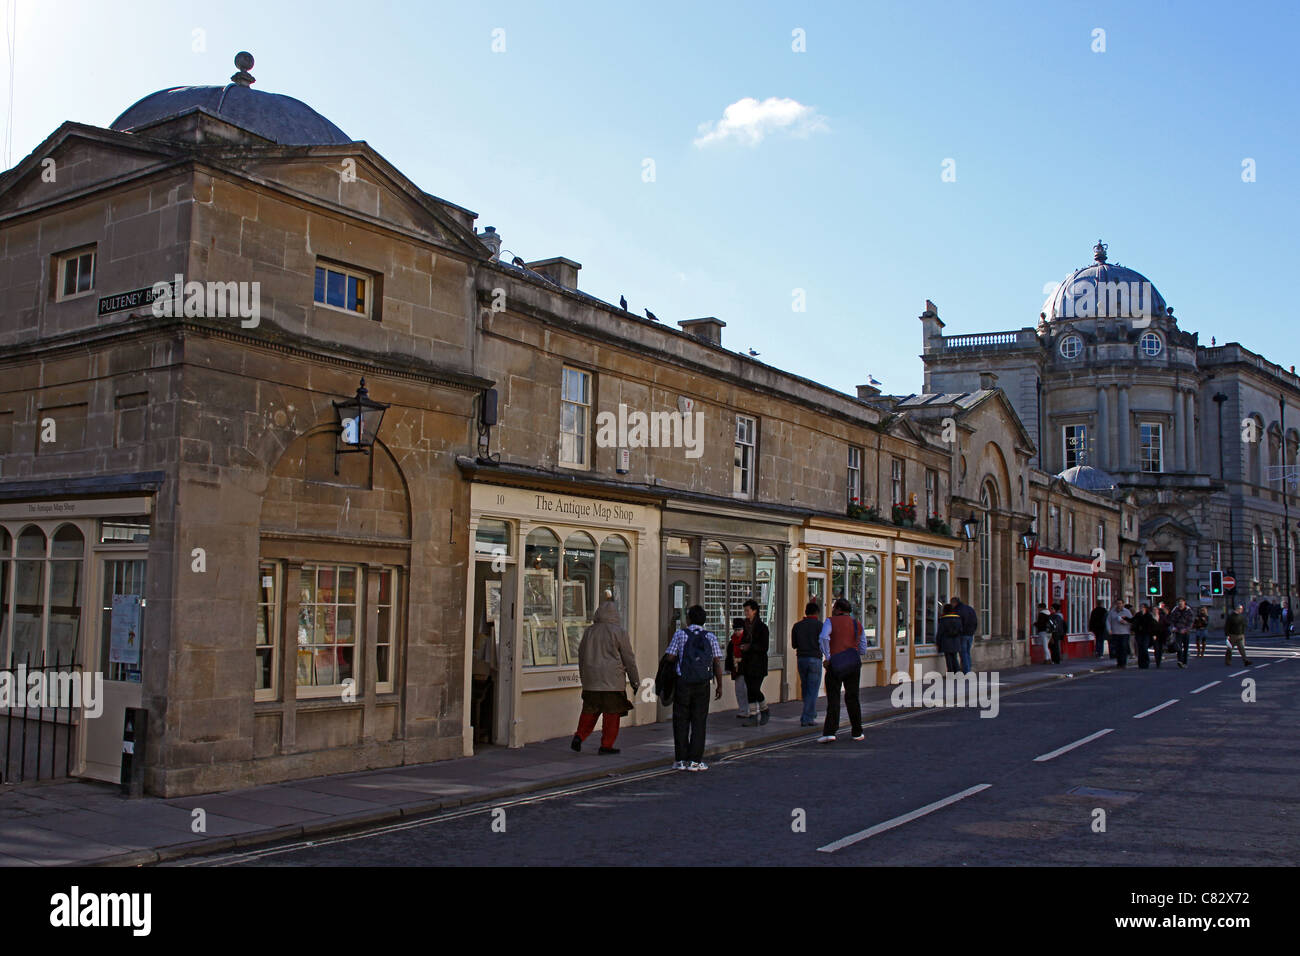 Historic shops on Pulteney Bridge in Bath (one of only 4 bridges in the world with shops on them) N.E. Somerset, England, UK Stock Photo